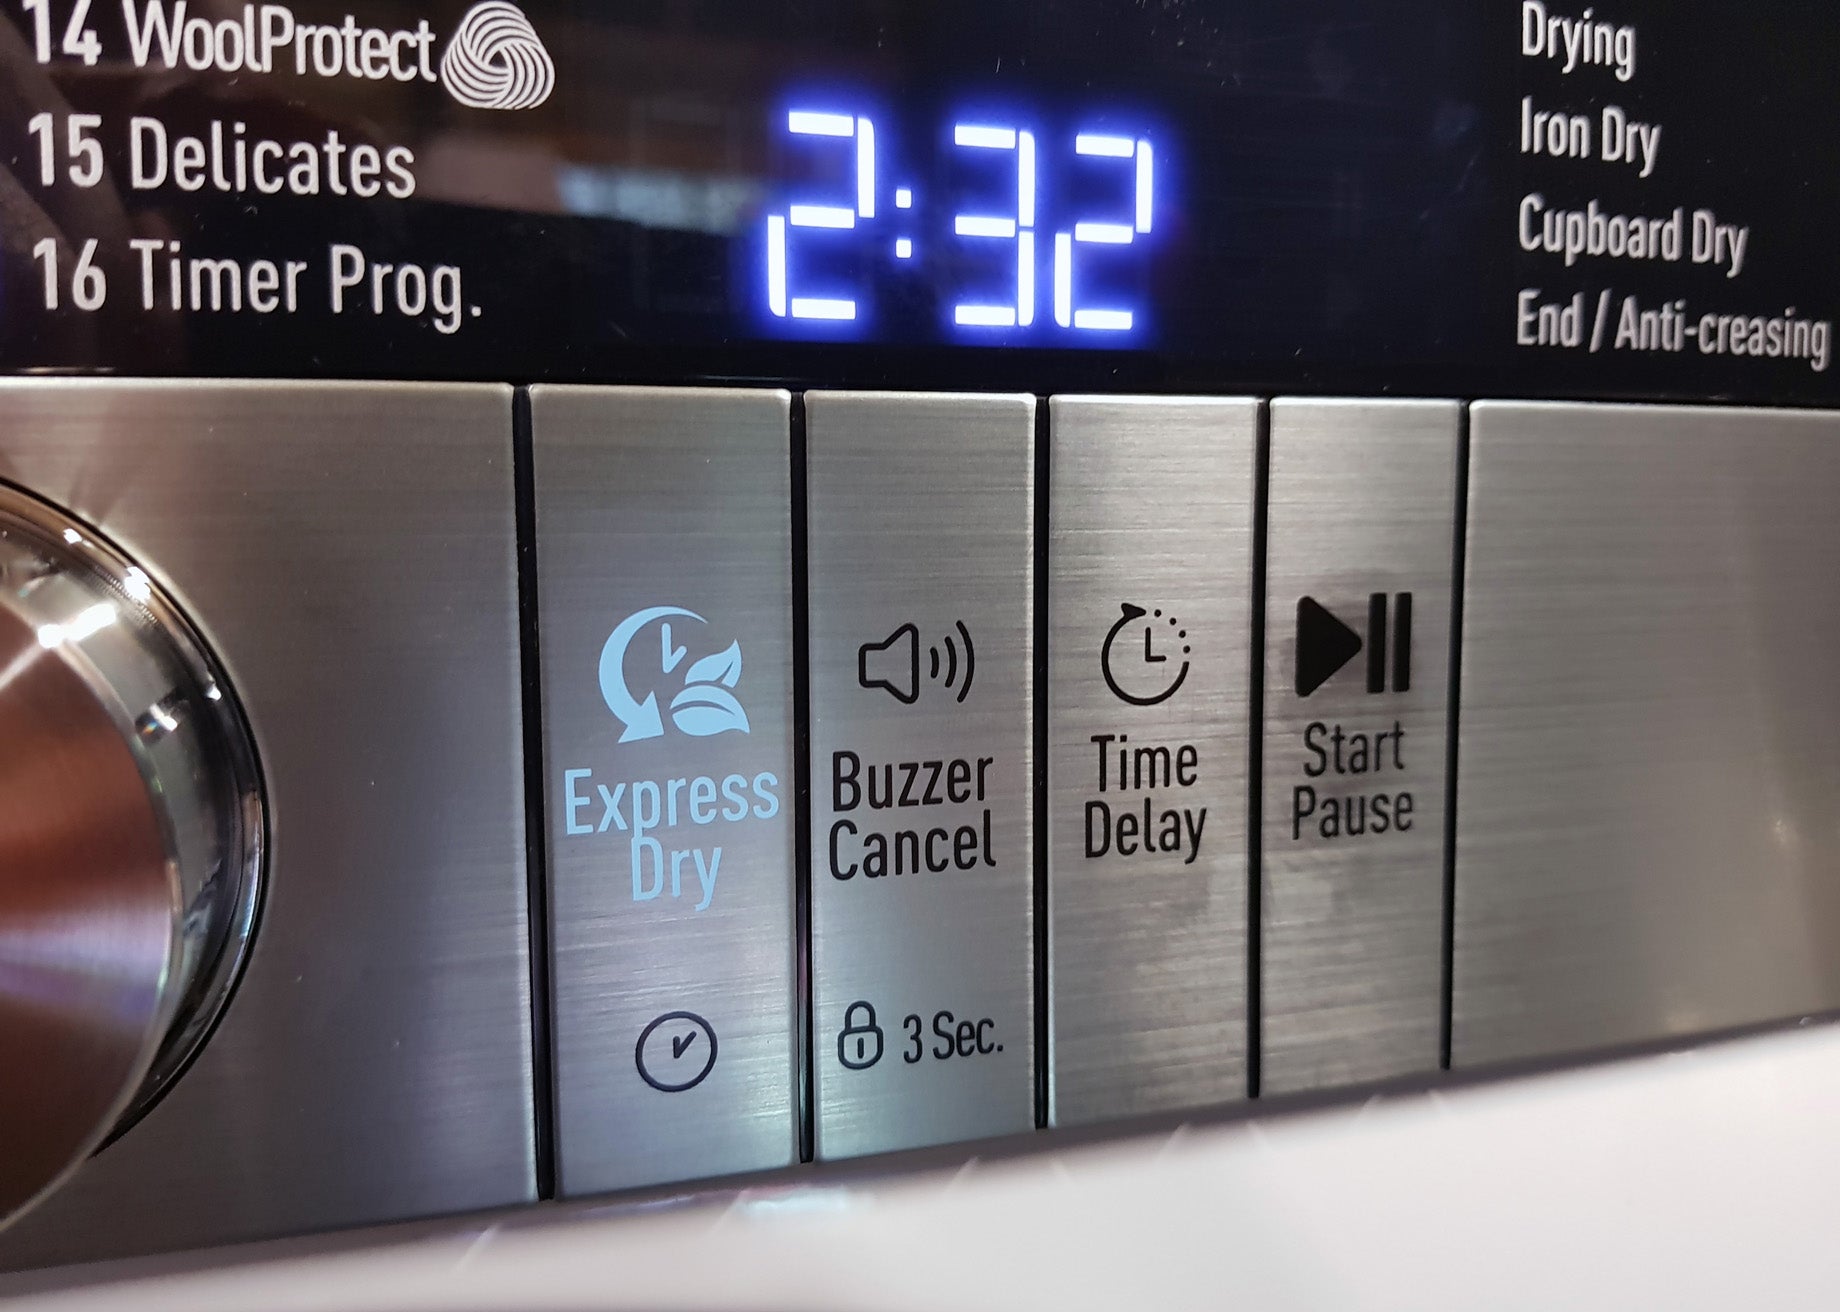 Grundig dryer control panel showing Express Dry and other options.